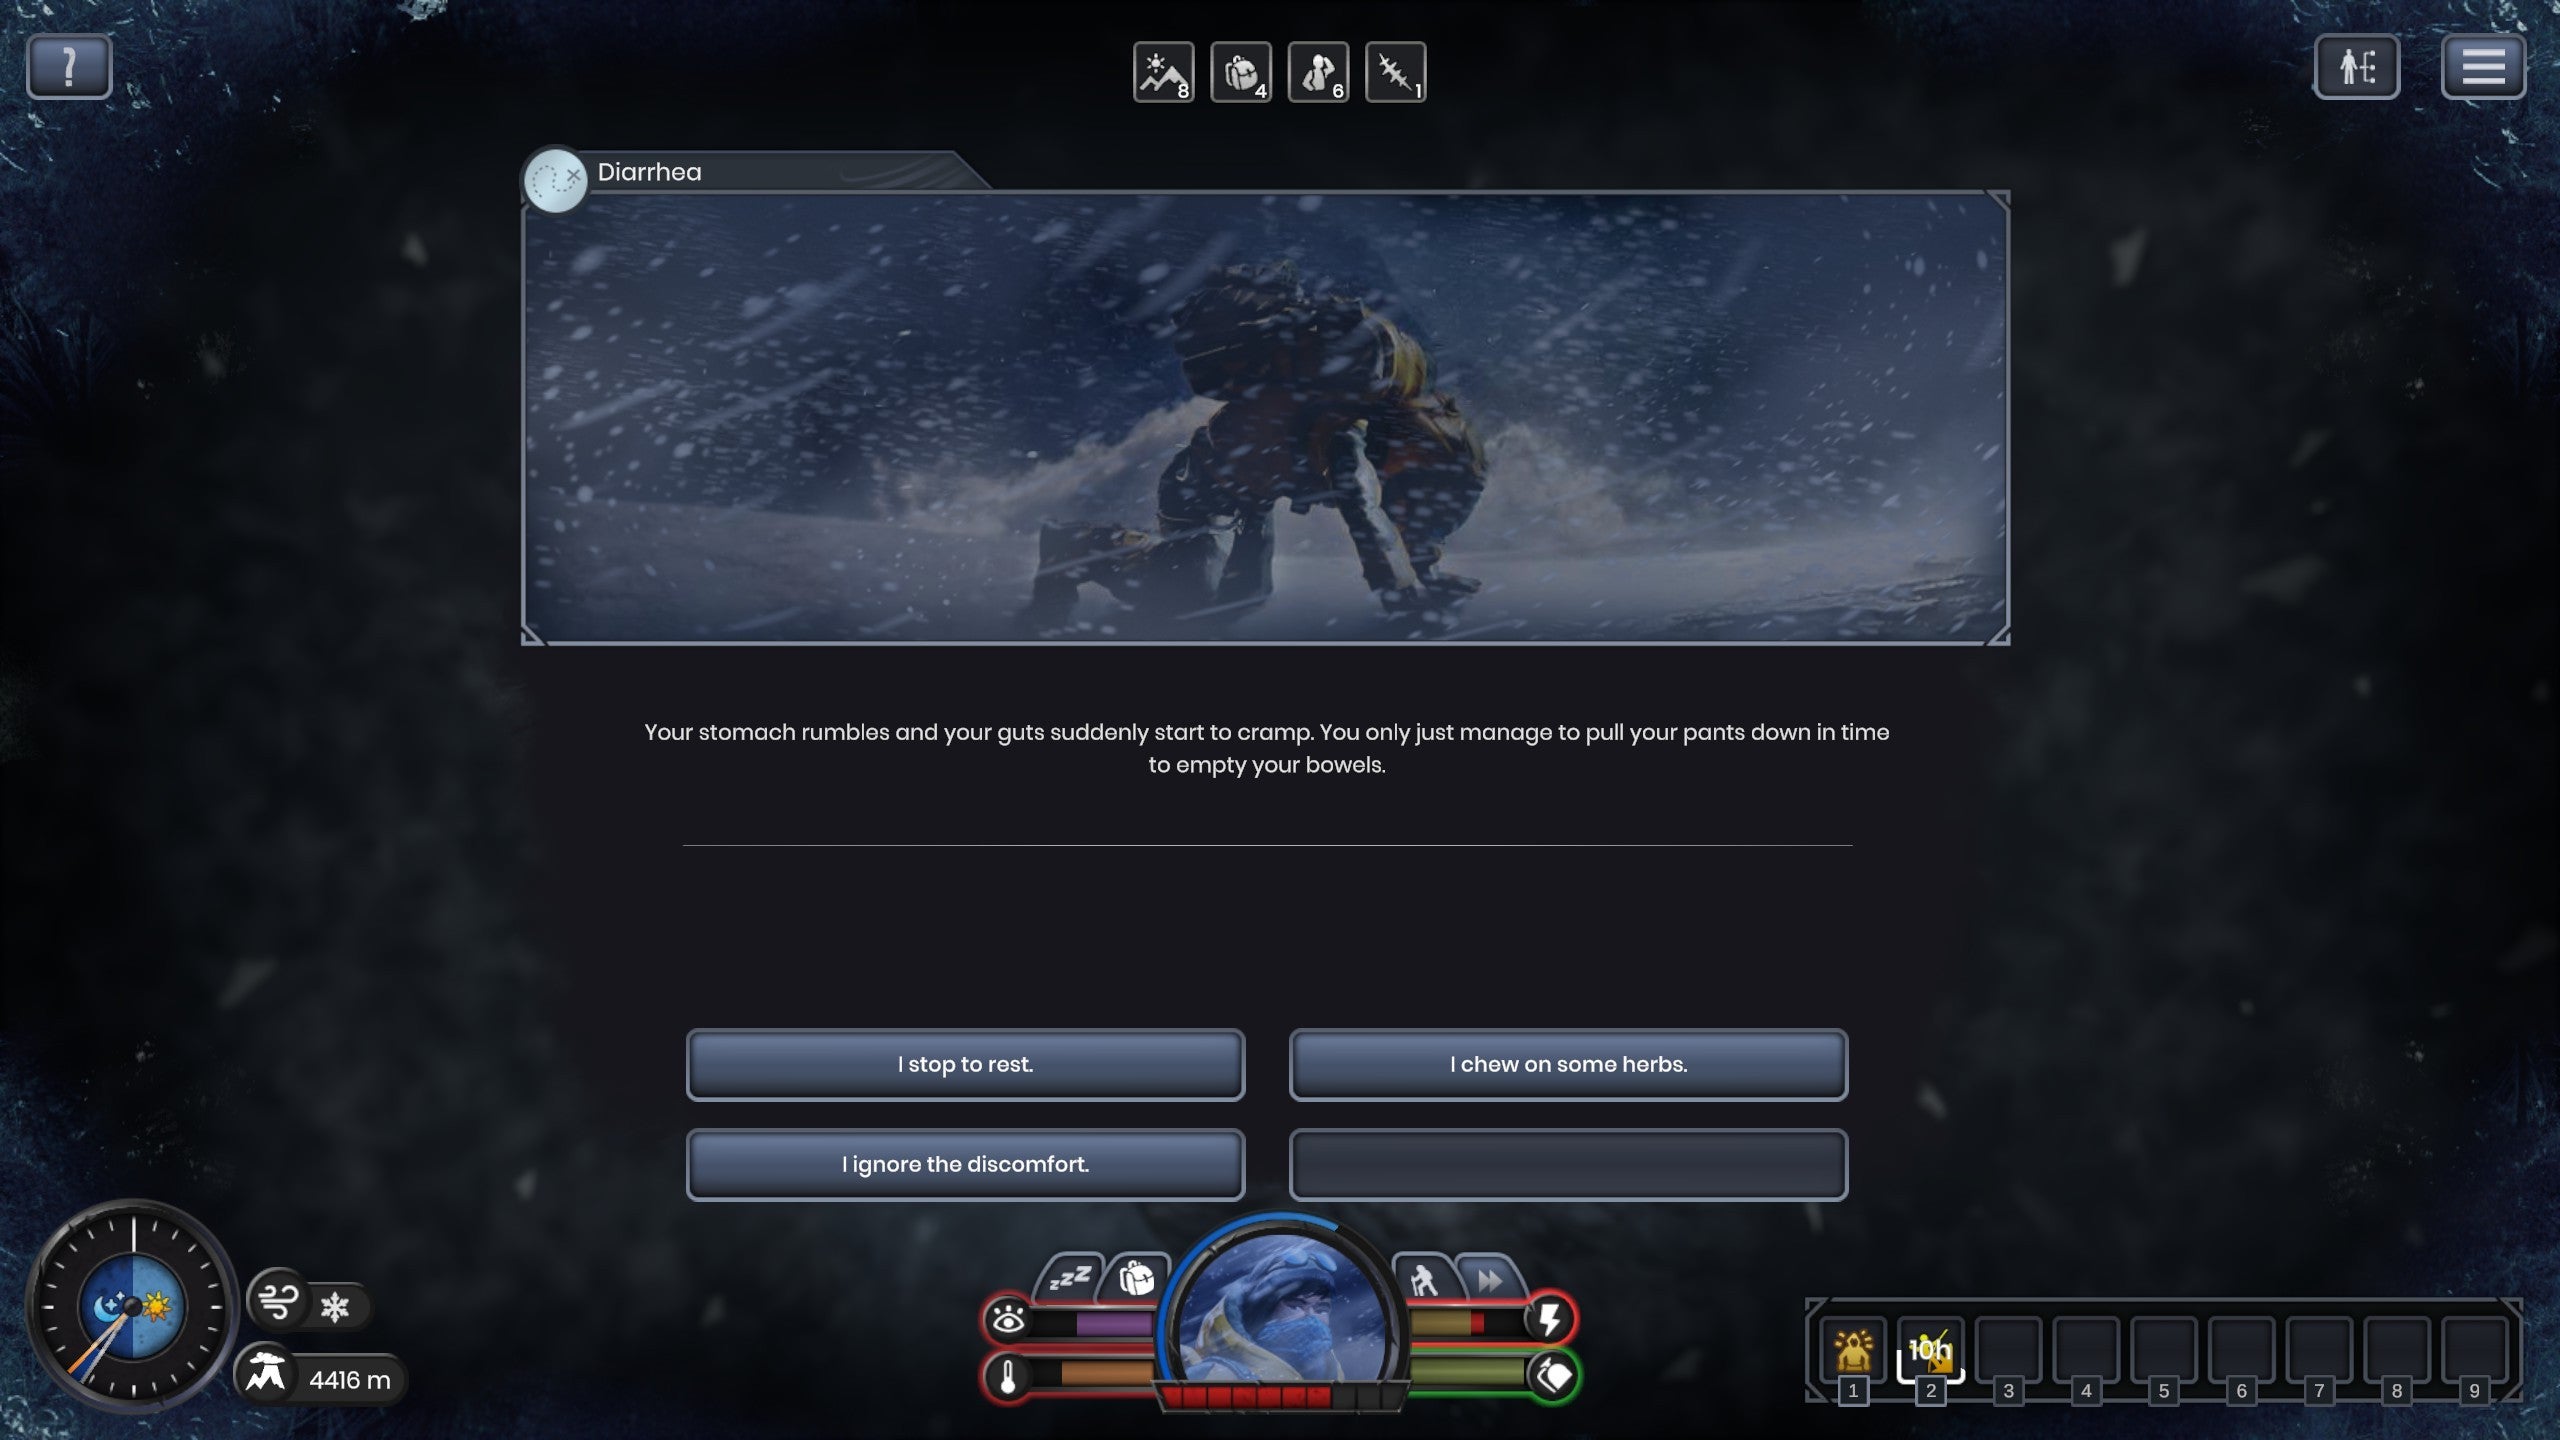 A screenshot of Insurmountable, showing a narrative event in which the player experiences diarrhoea on the mountainside.